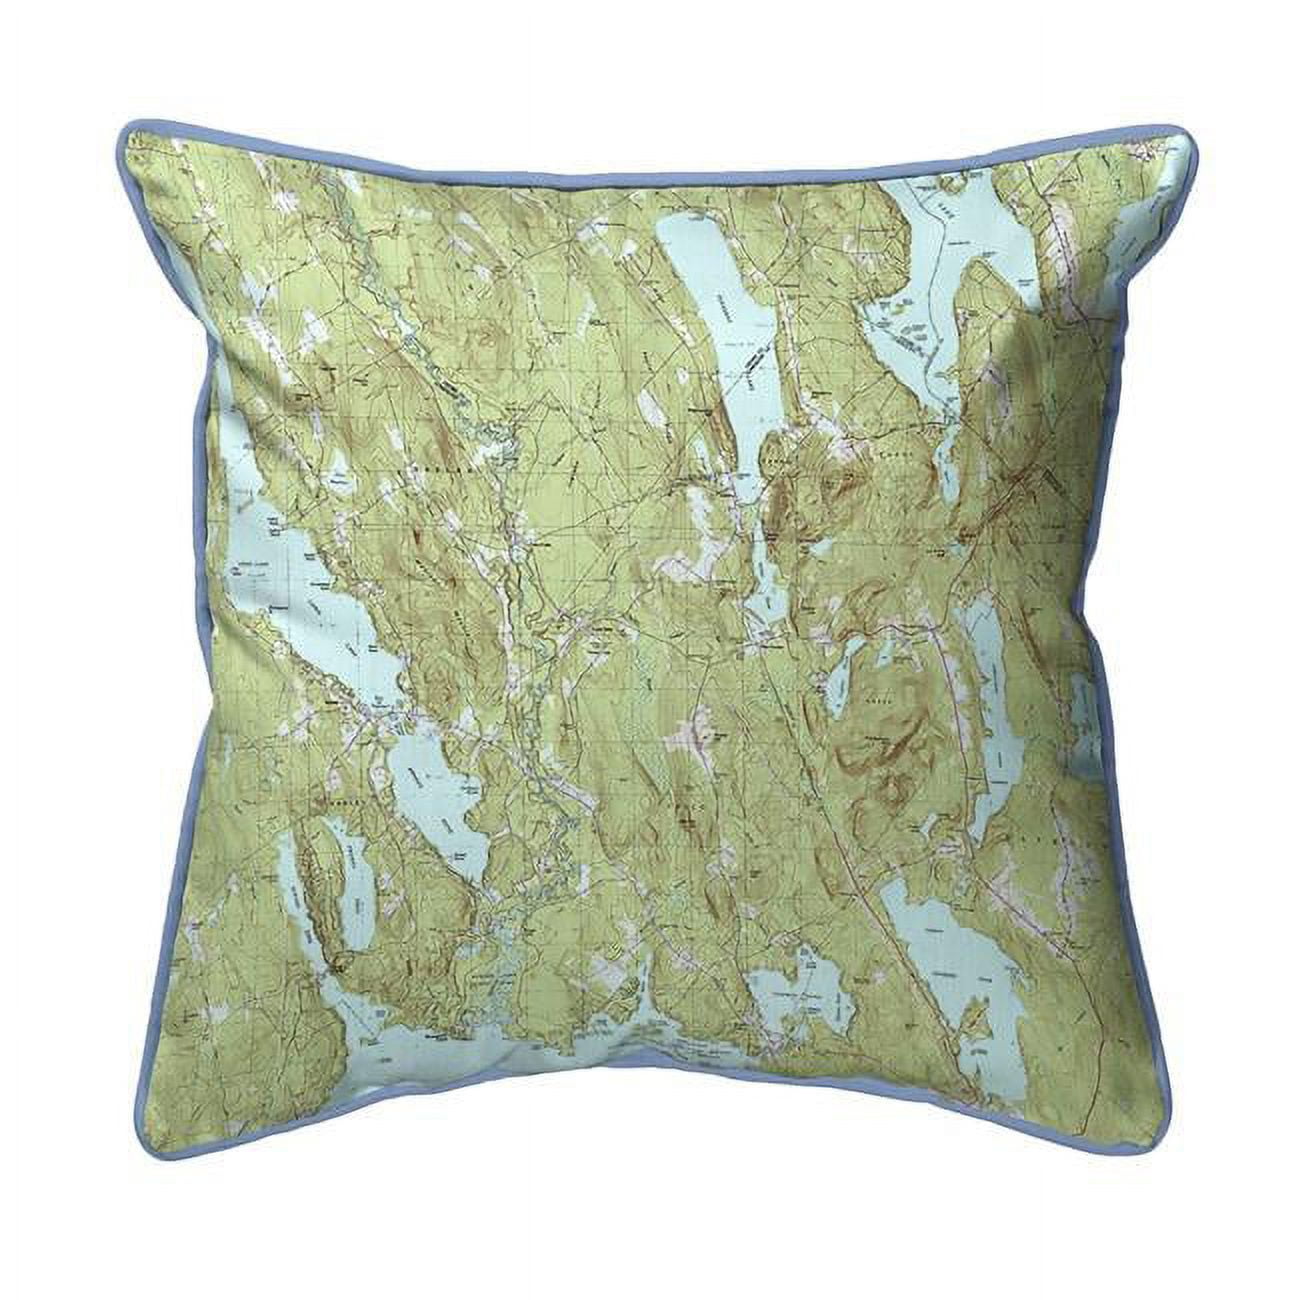 Casco & Sebago Lake, ME Nautical Map Extra Large Zippered Indoor & Outdoor Pillow - 22 x 22 in -  JensenDistributionServices, MI2817577